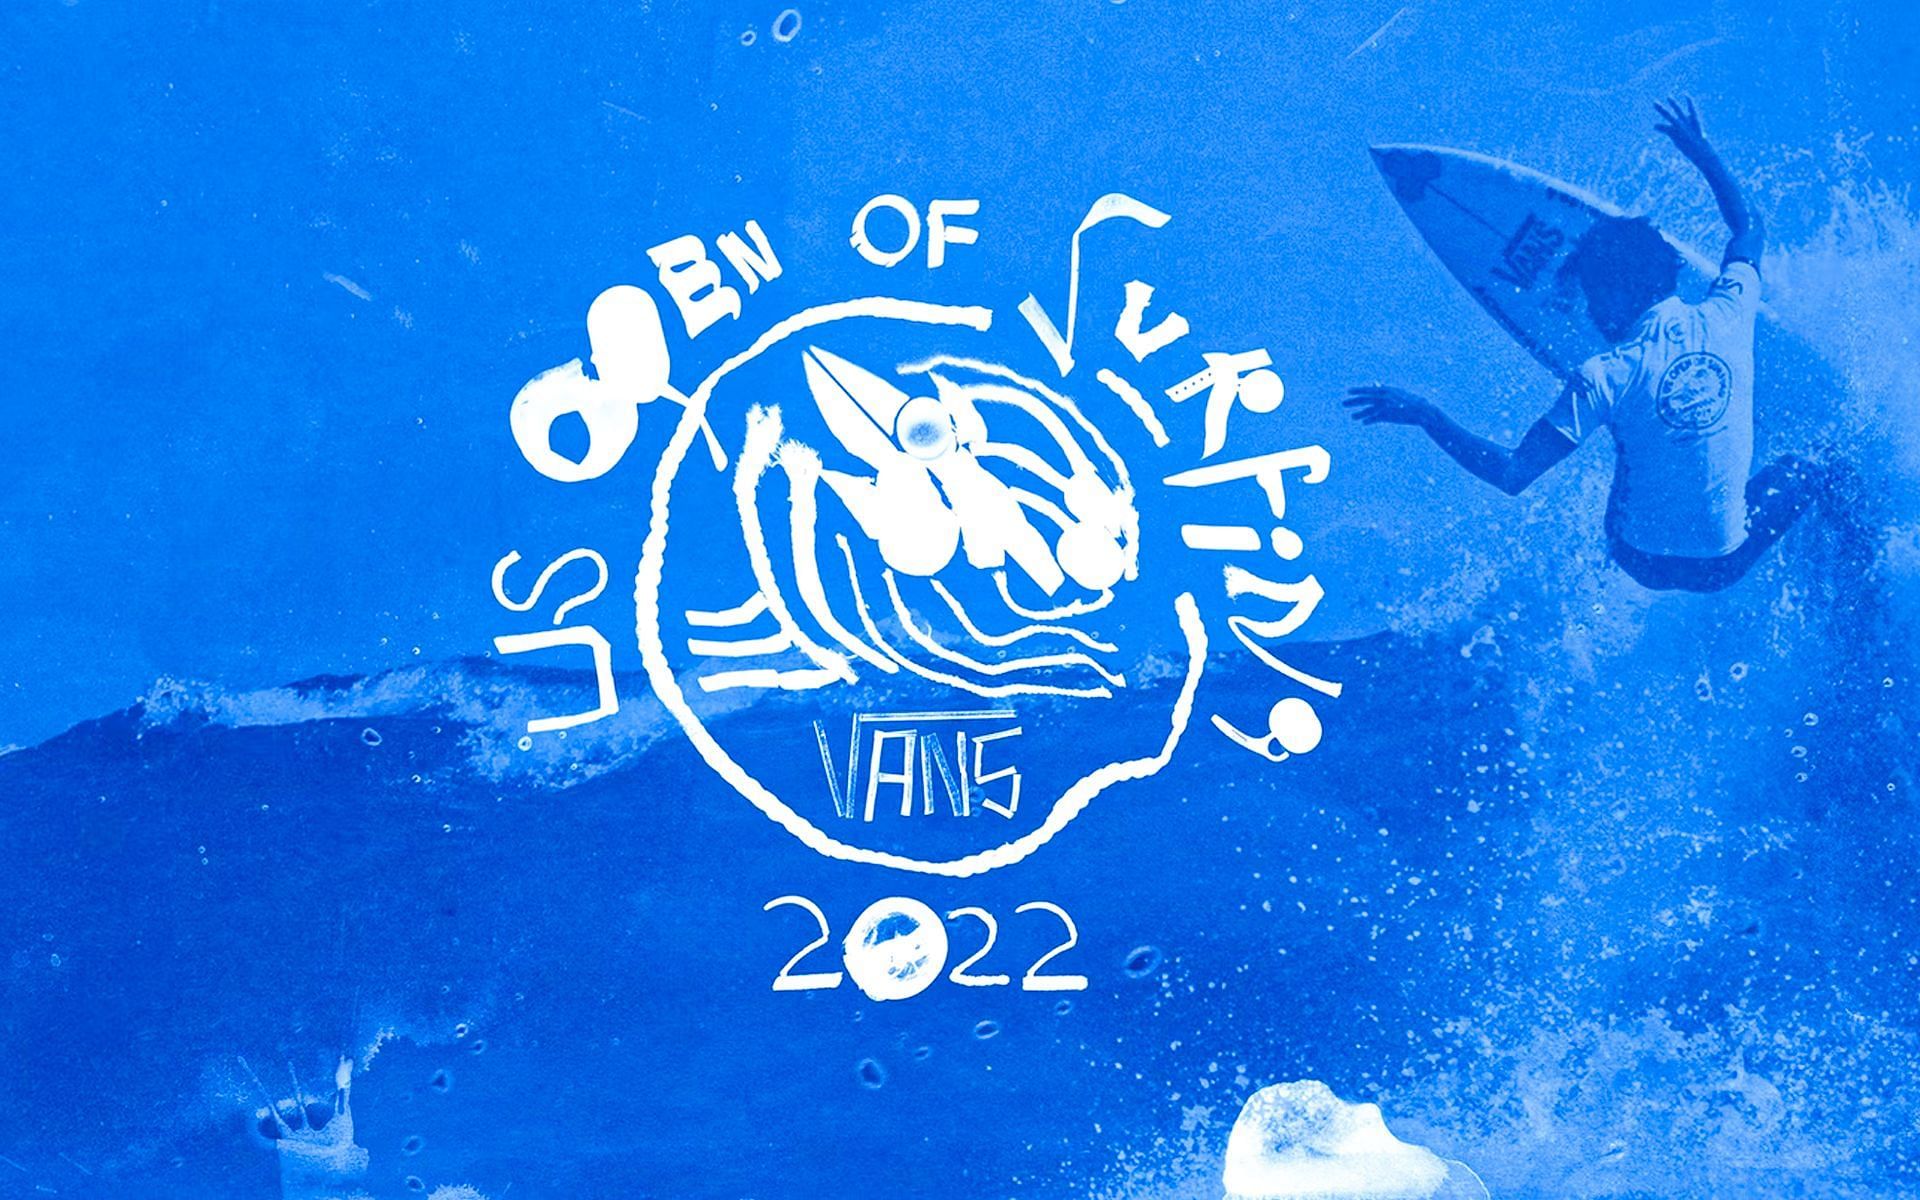 US Open of Surfing 2022: Dates, schedule and more